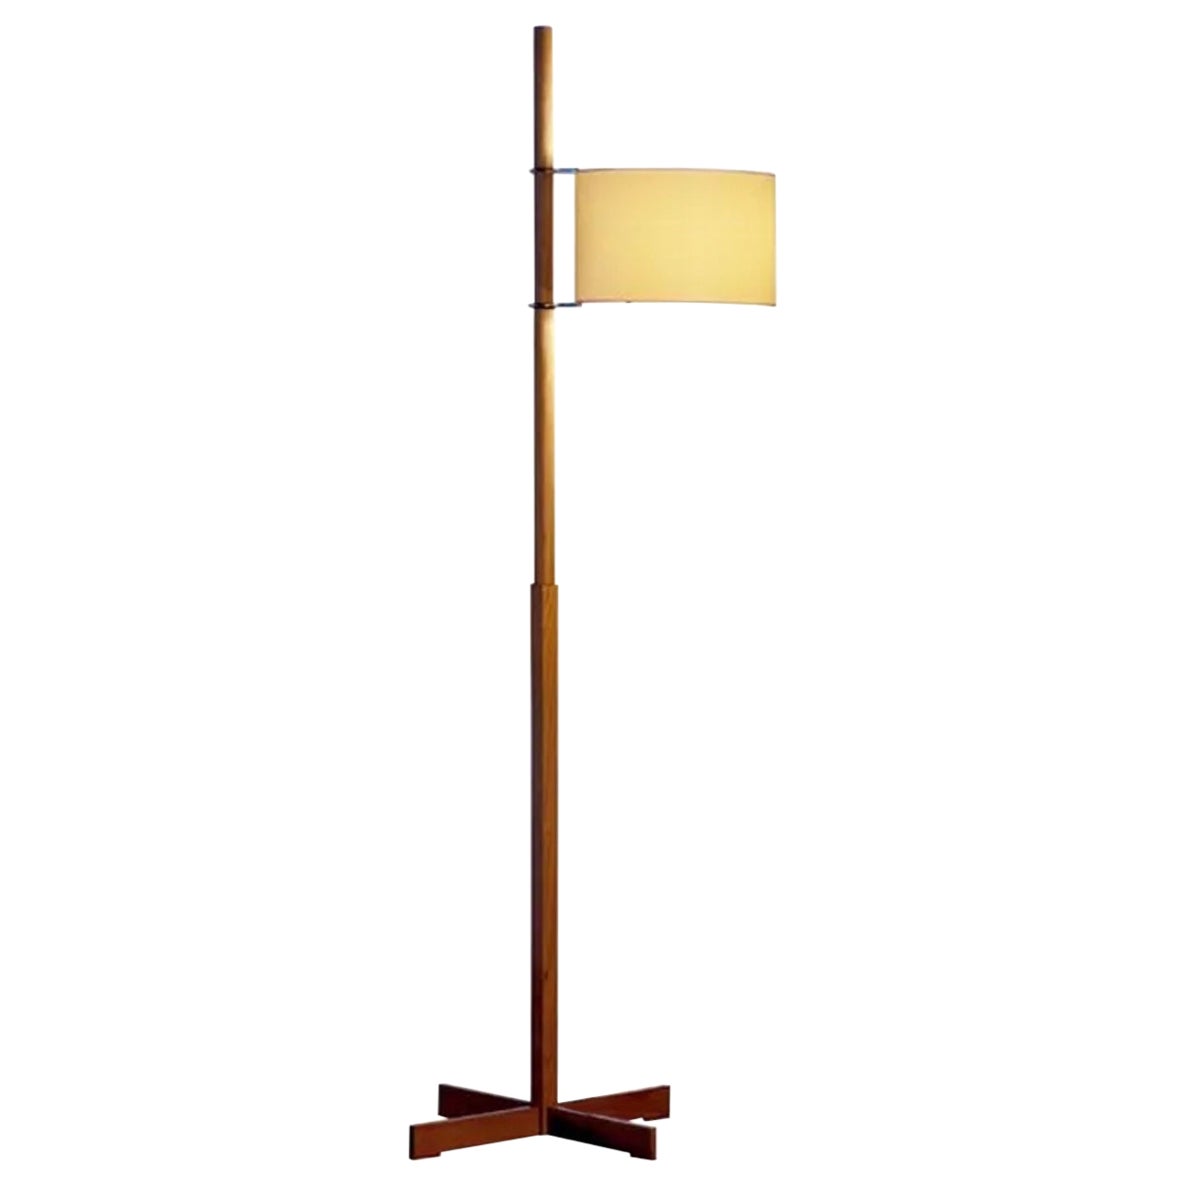 TMM Floor Lamp by Miguel Milá for Santa & Cole